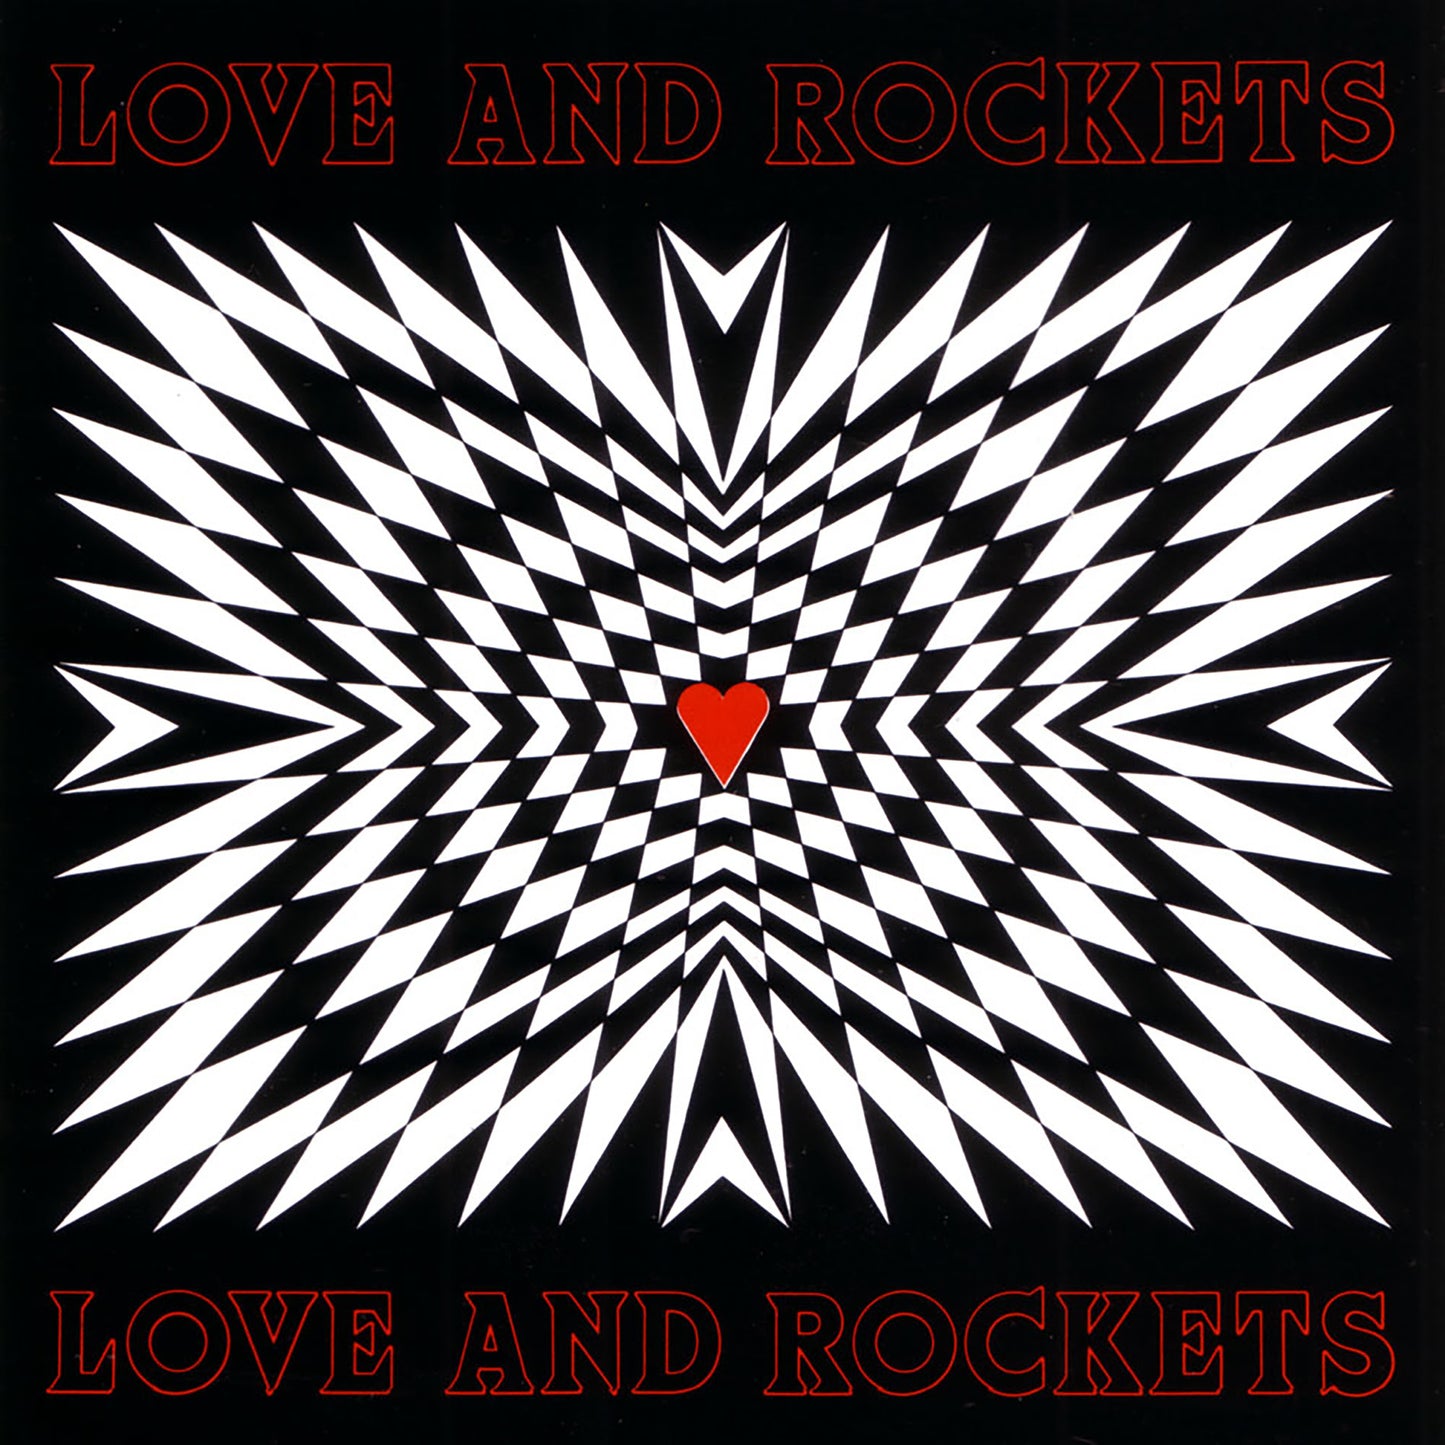 Love And Rockets – Love And Rockets | Buy the Vinyl LP from Flying Nun Records 